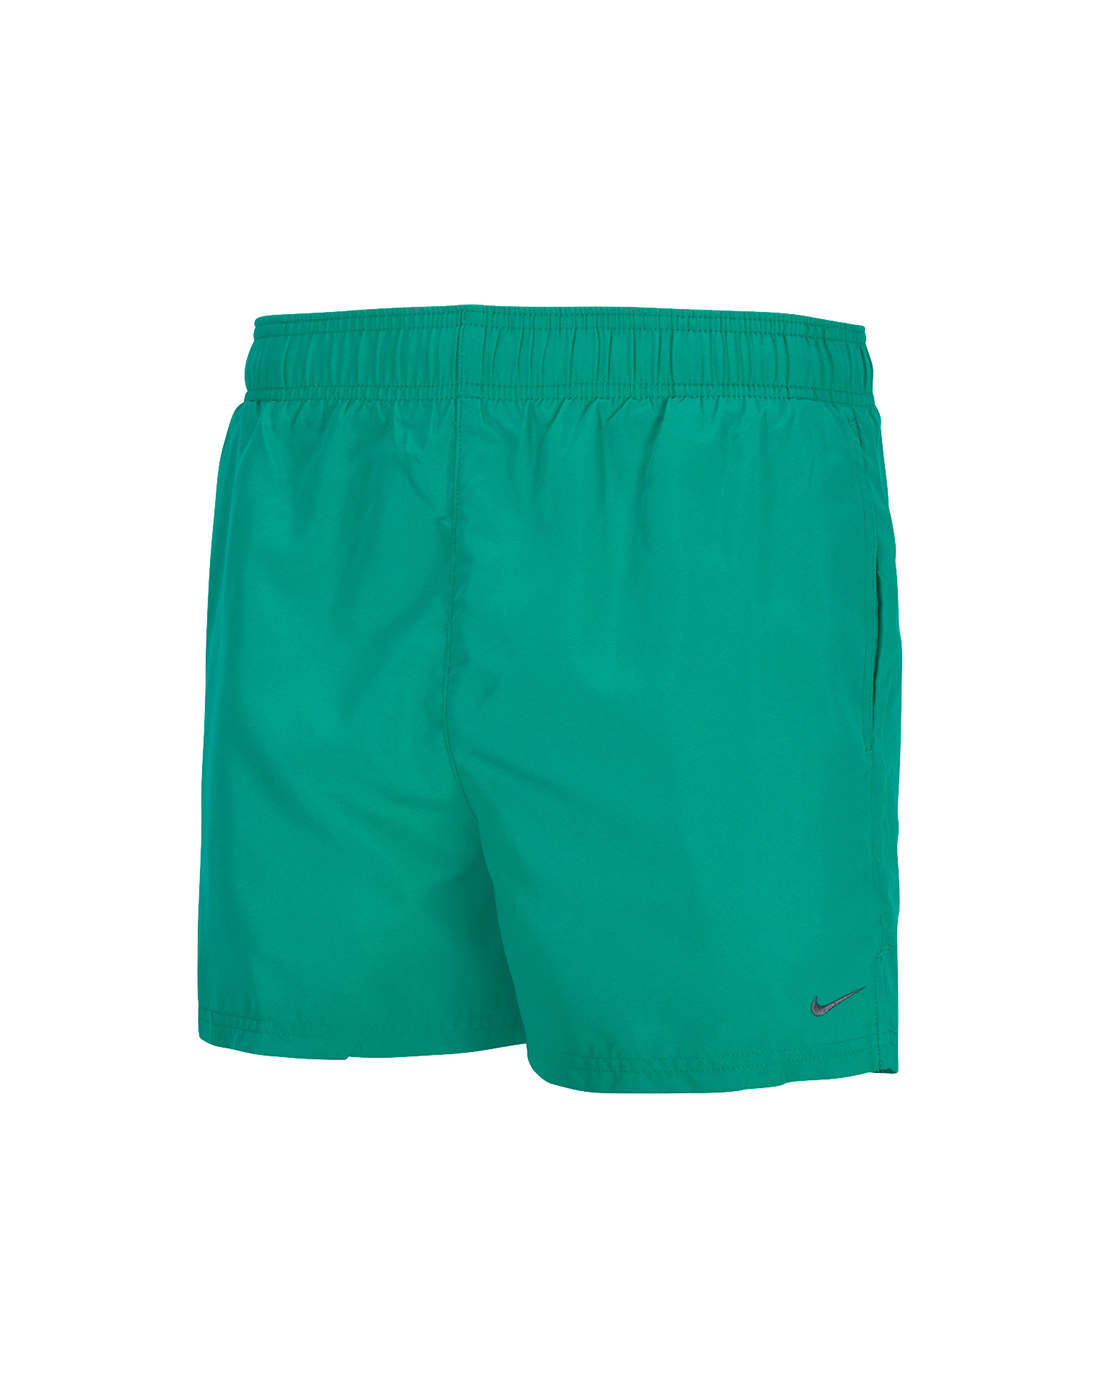 Men's Nike Volley Shorts | Green | Life Style Sports